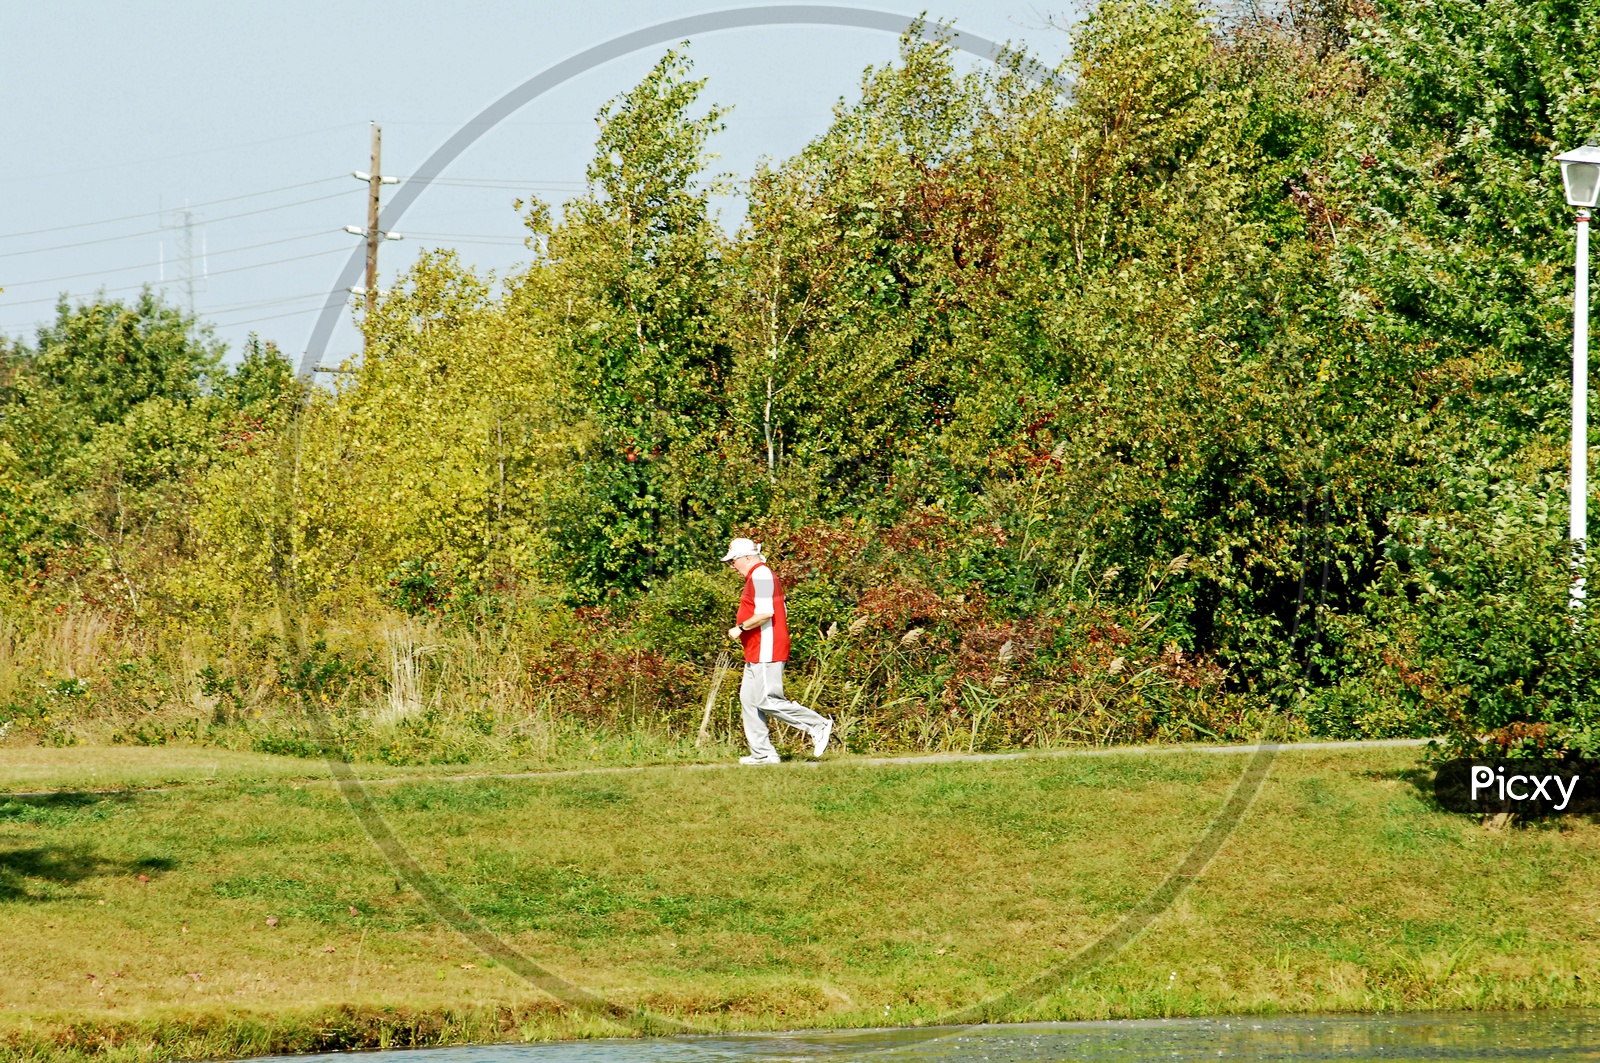 An old man jogging in a park